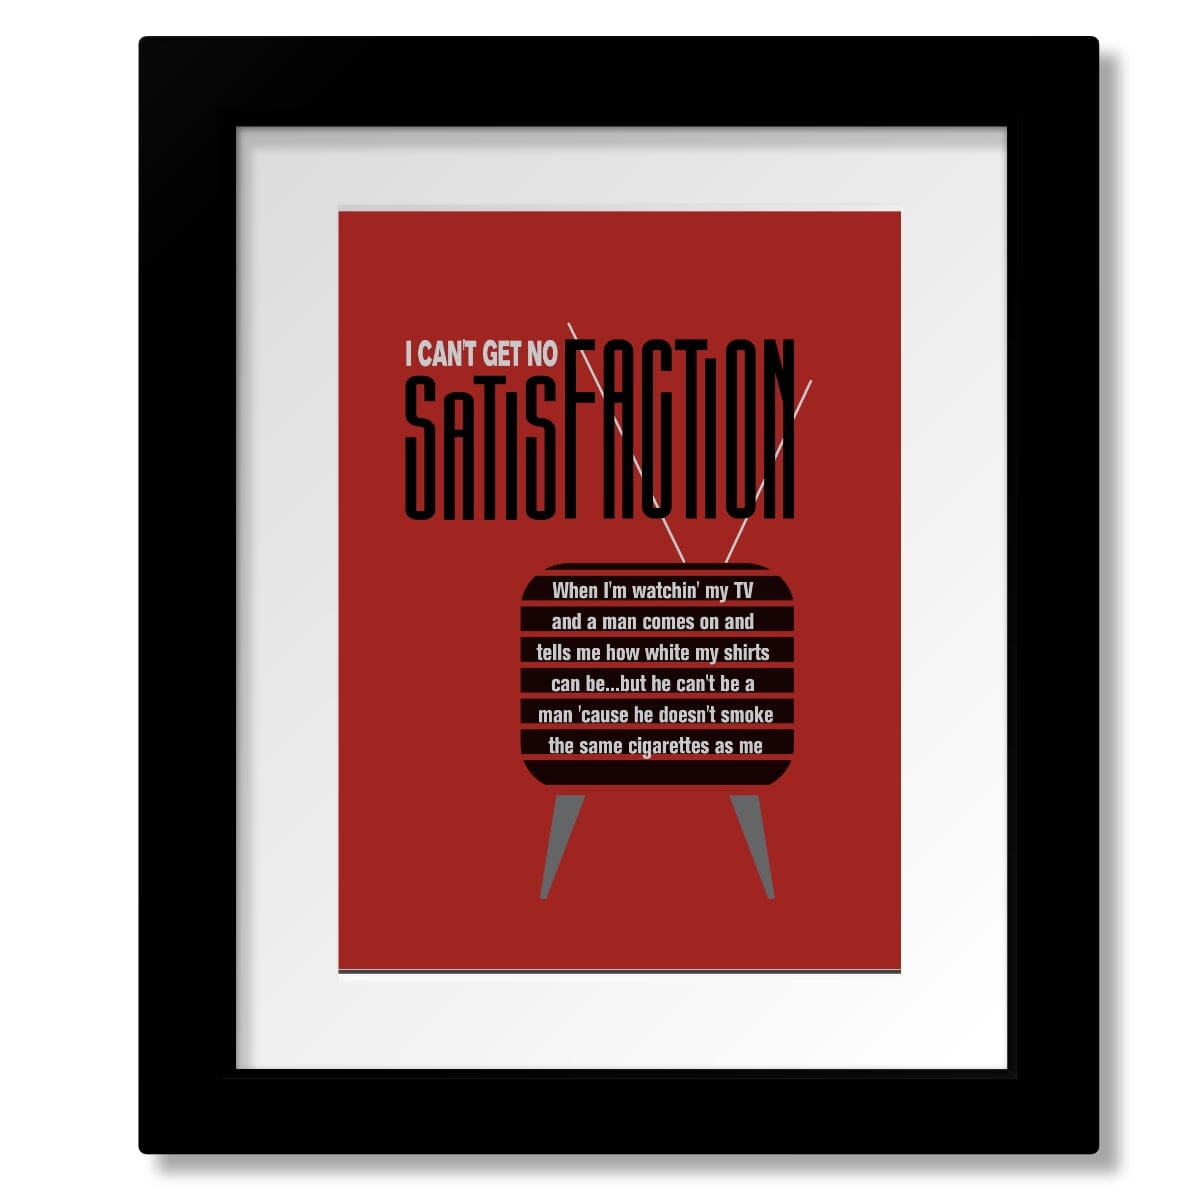 I Can't Get No Satisfaction by Rolling Stones - Lyric Print Song Lyrics Art Song Lyrics Art 8x10 Matted and Framed Print 